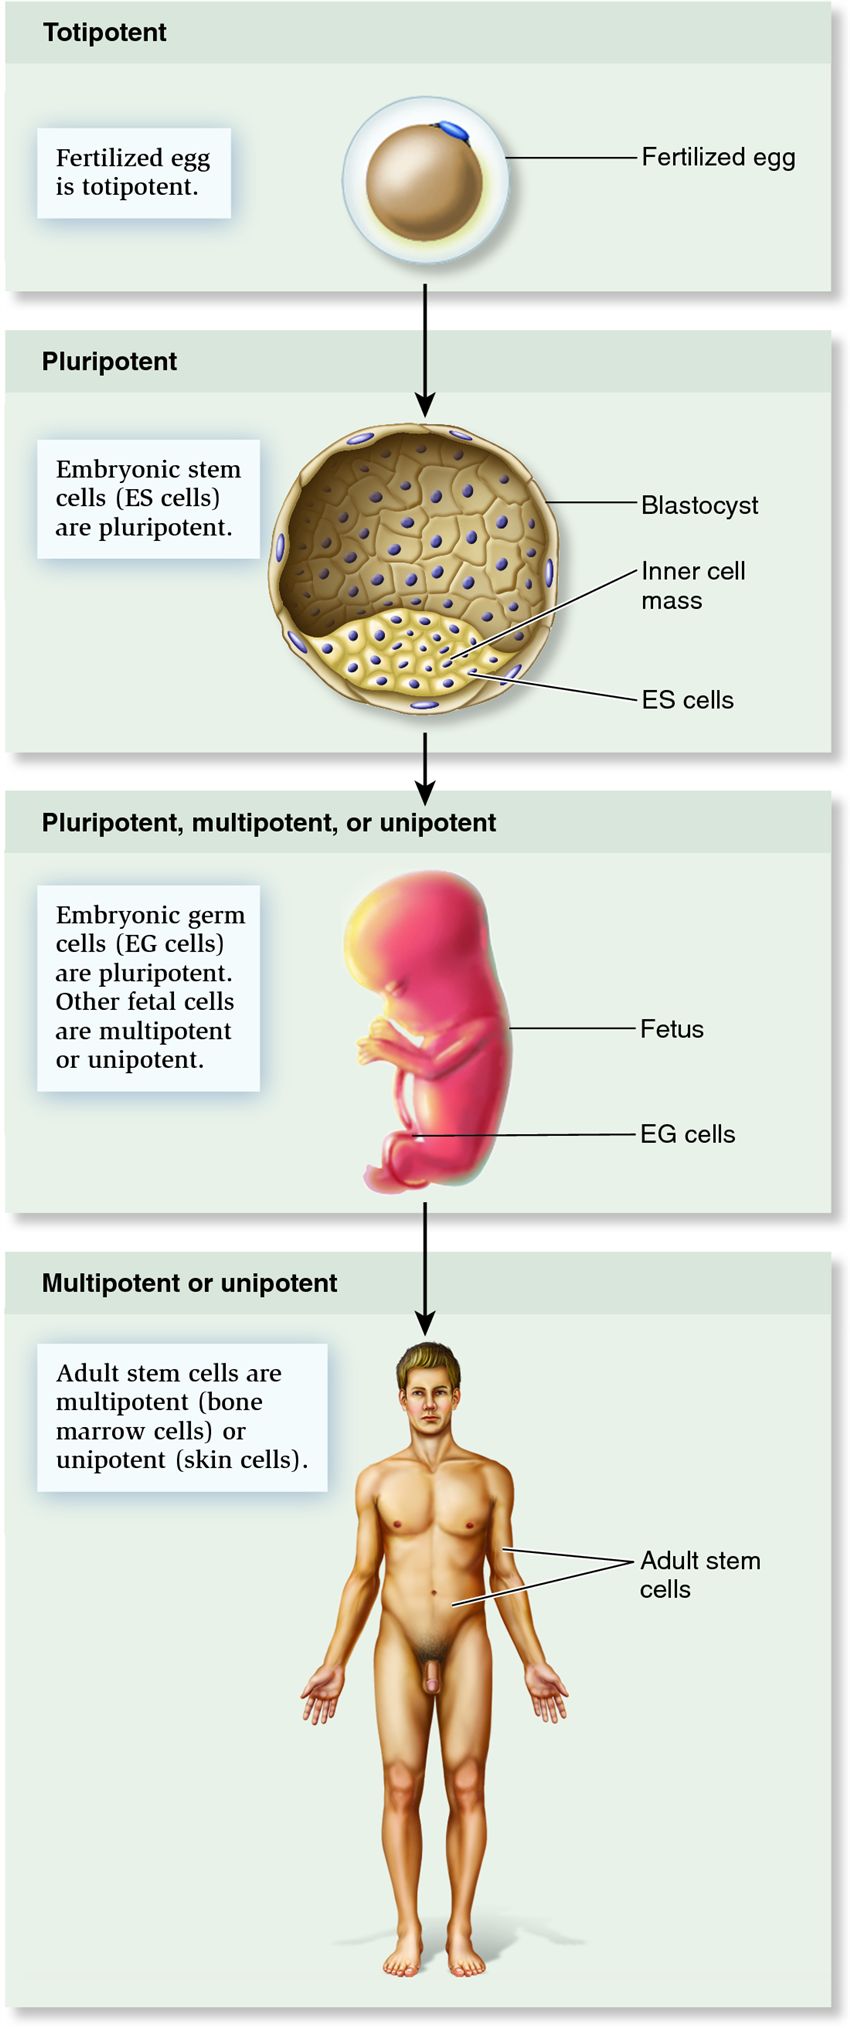 Occurrence of stem cells at different stages of mammalian development